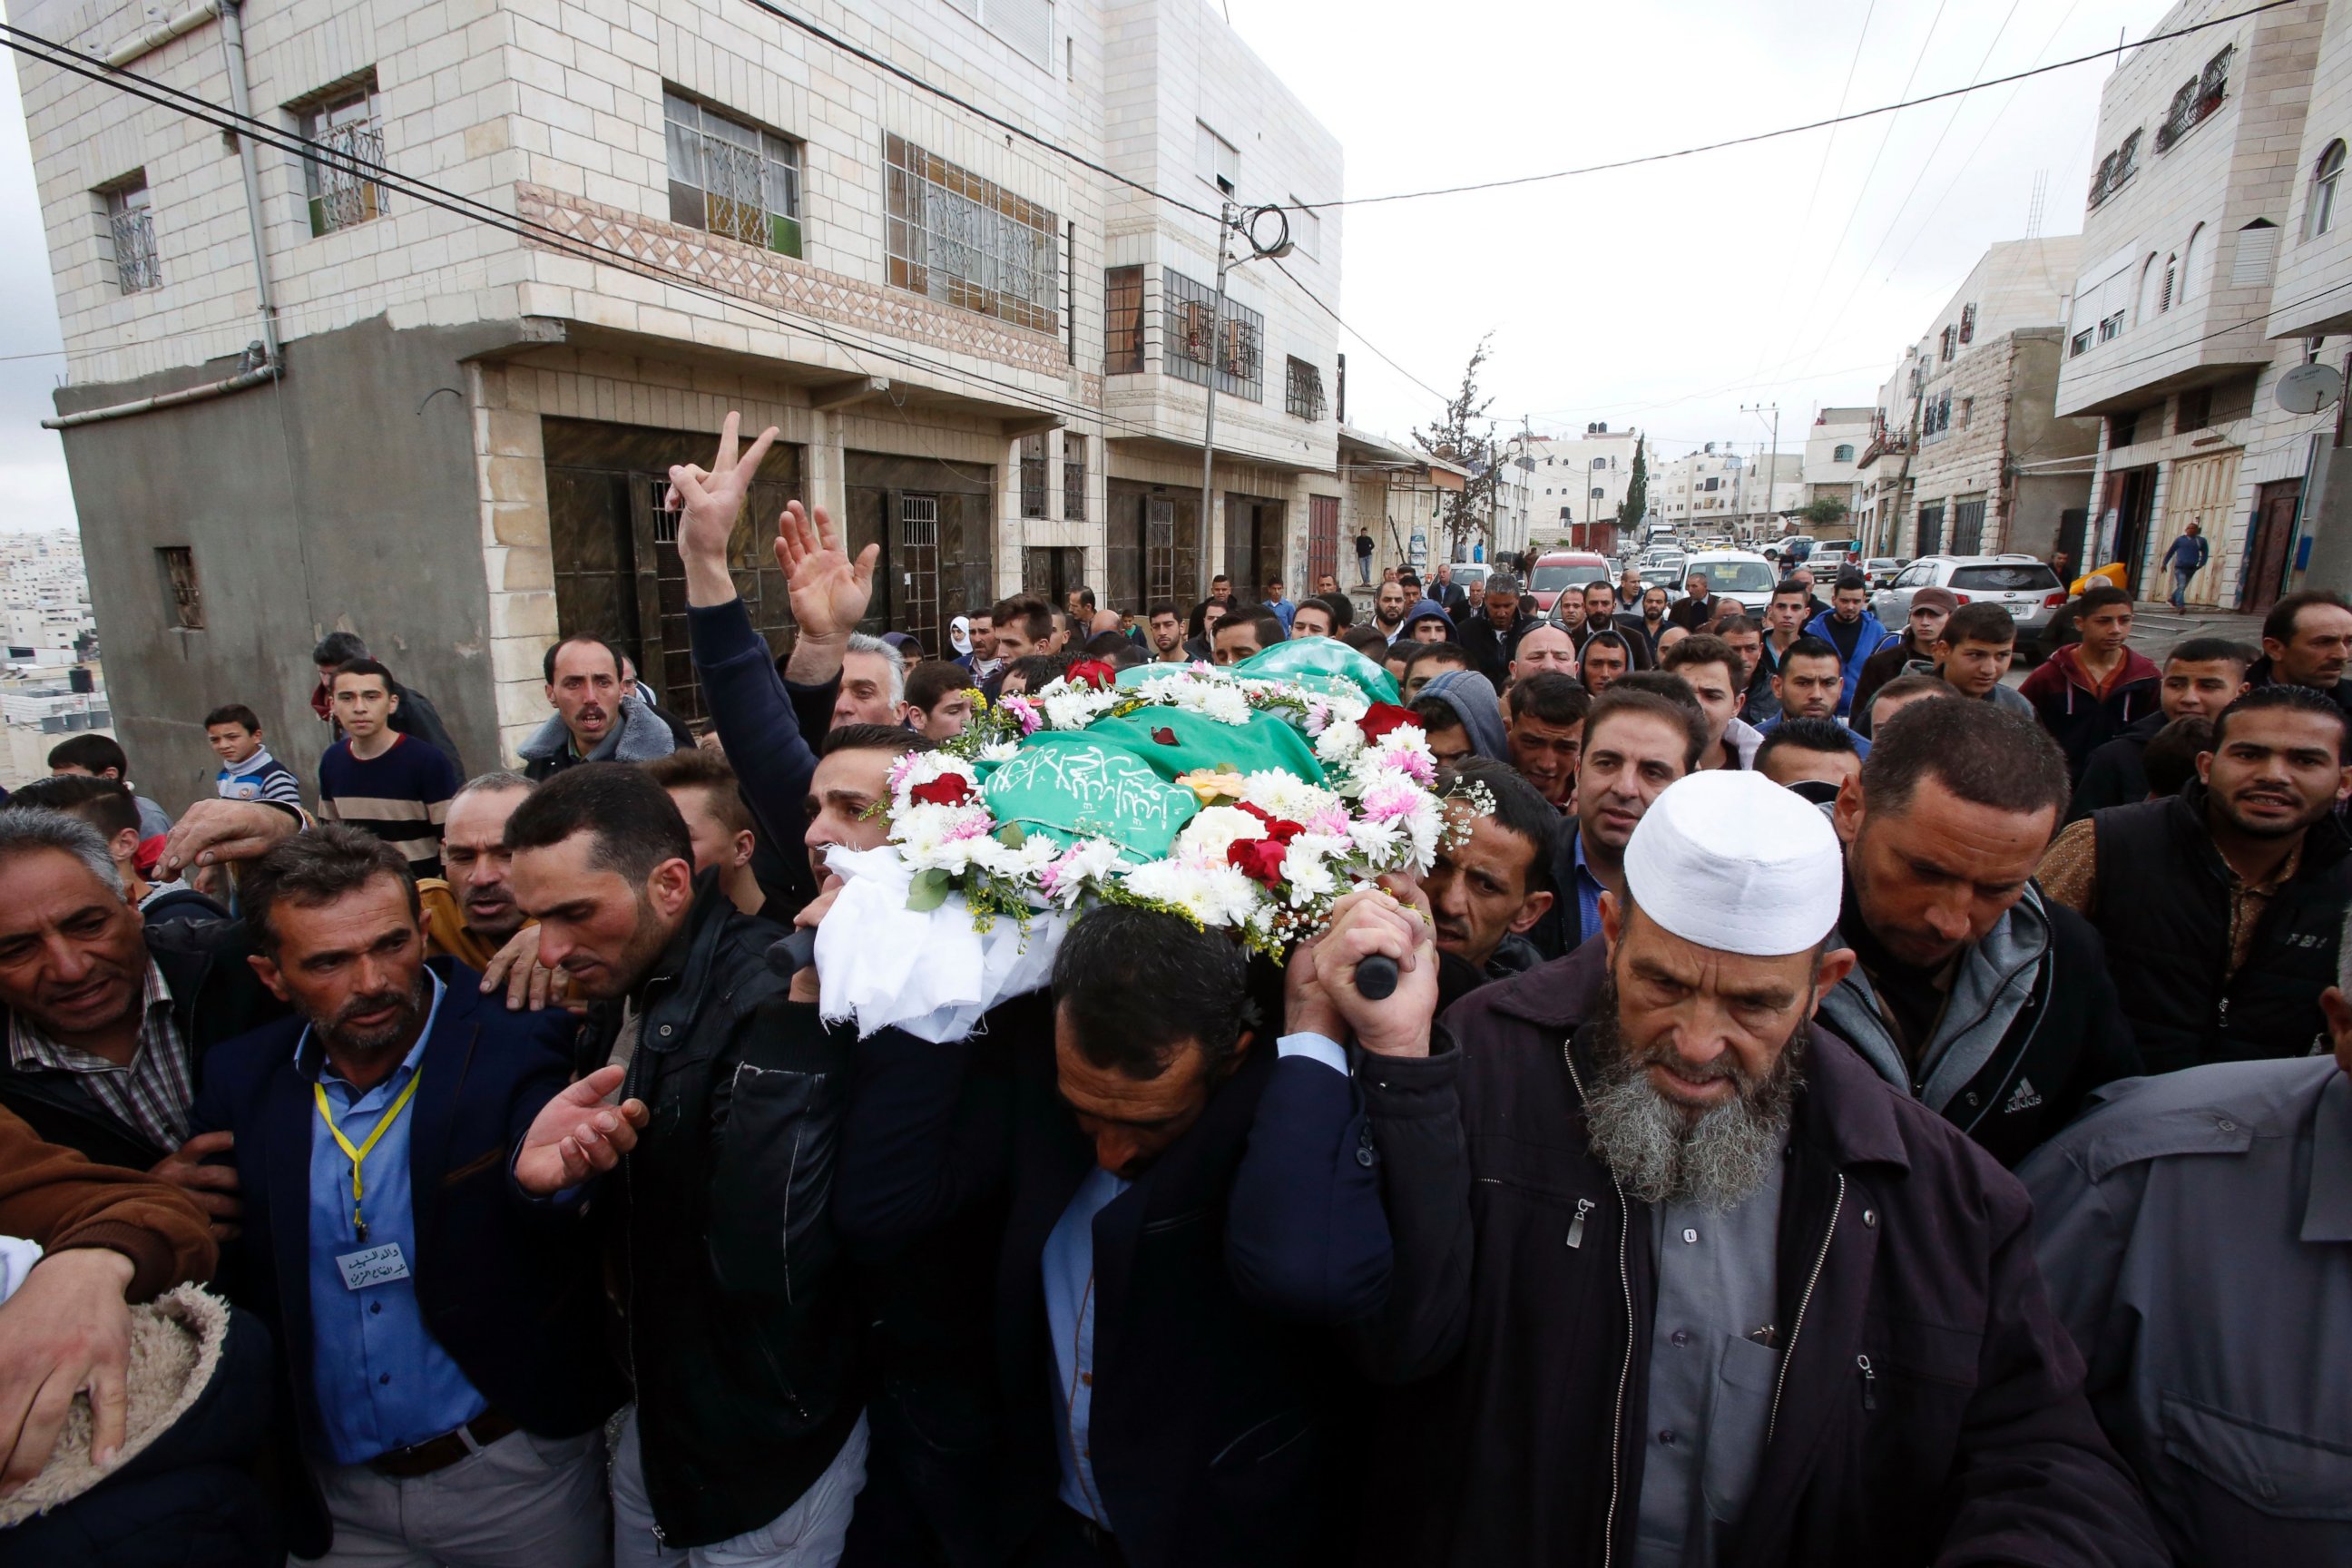 PHOTO: Relatives and friends carry the body of Abdul Fatah al-Sharif at his funeral, May 28, 2016 in Hebron.